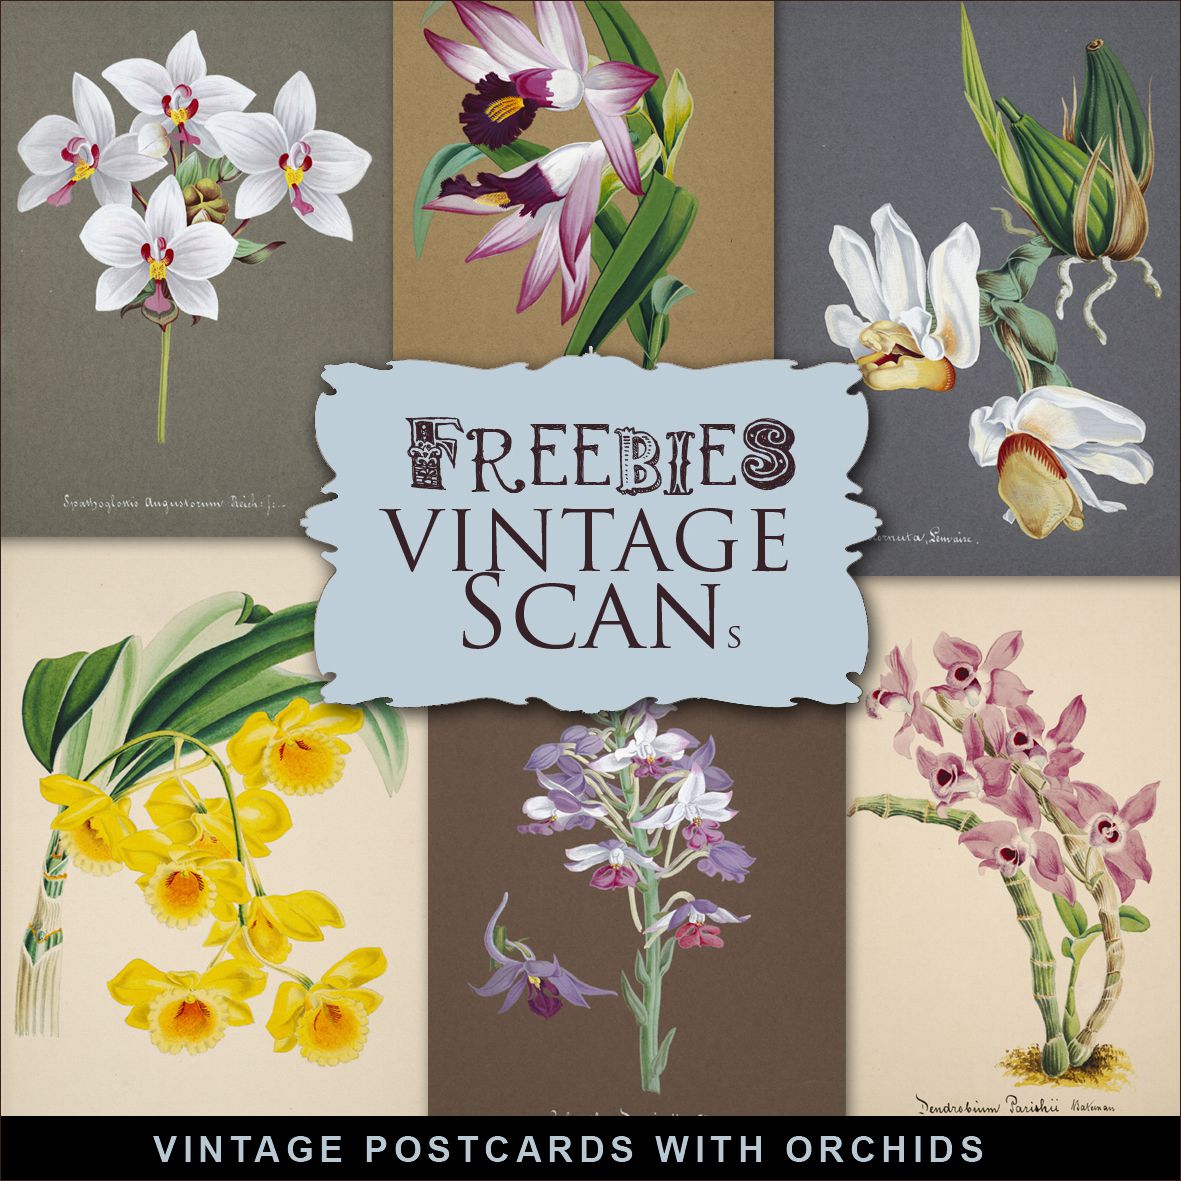 Freebies Kit of Vintage Postcards with Orchids, Freebies, Postcards, Vintage, Flowers, Vintage Orchids, Vintage orchidées, Orchidées, fleurs vintage, Kit de scrapbooking vintage, Scrapbook kit vintage,